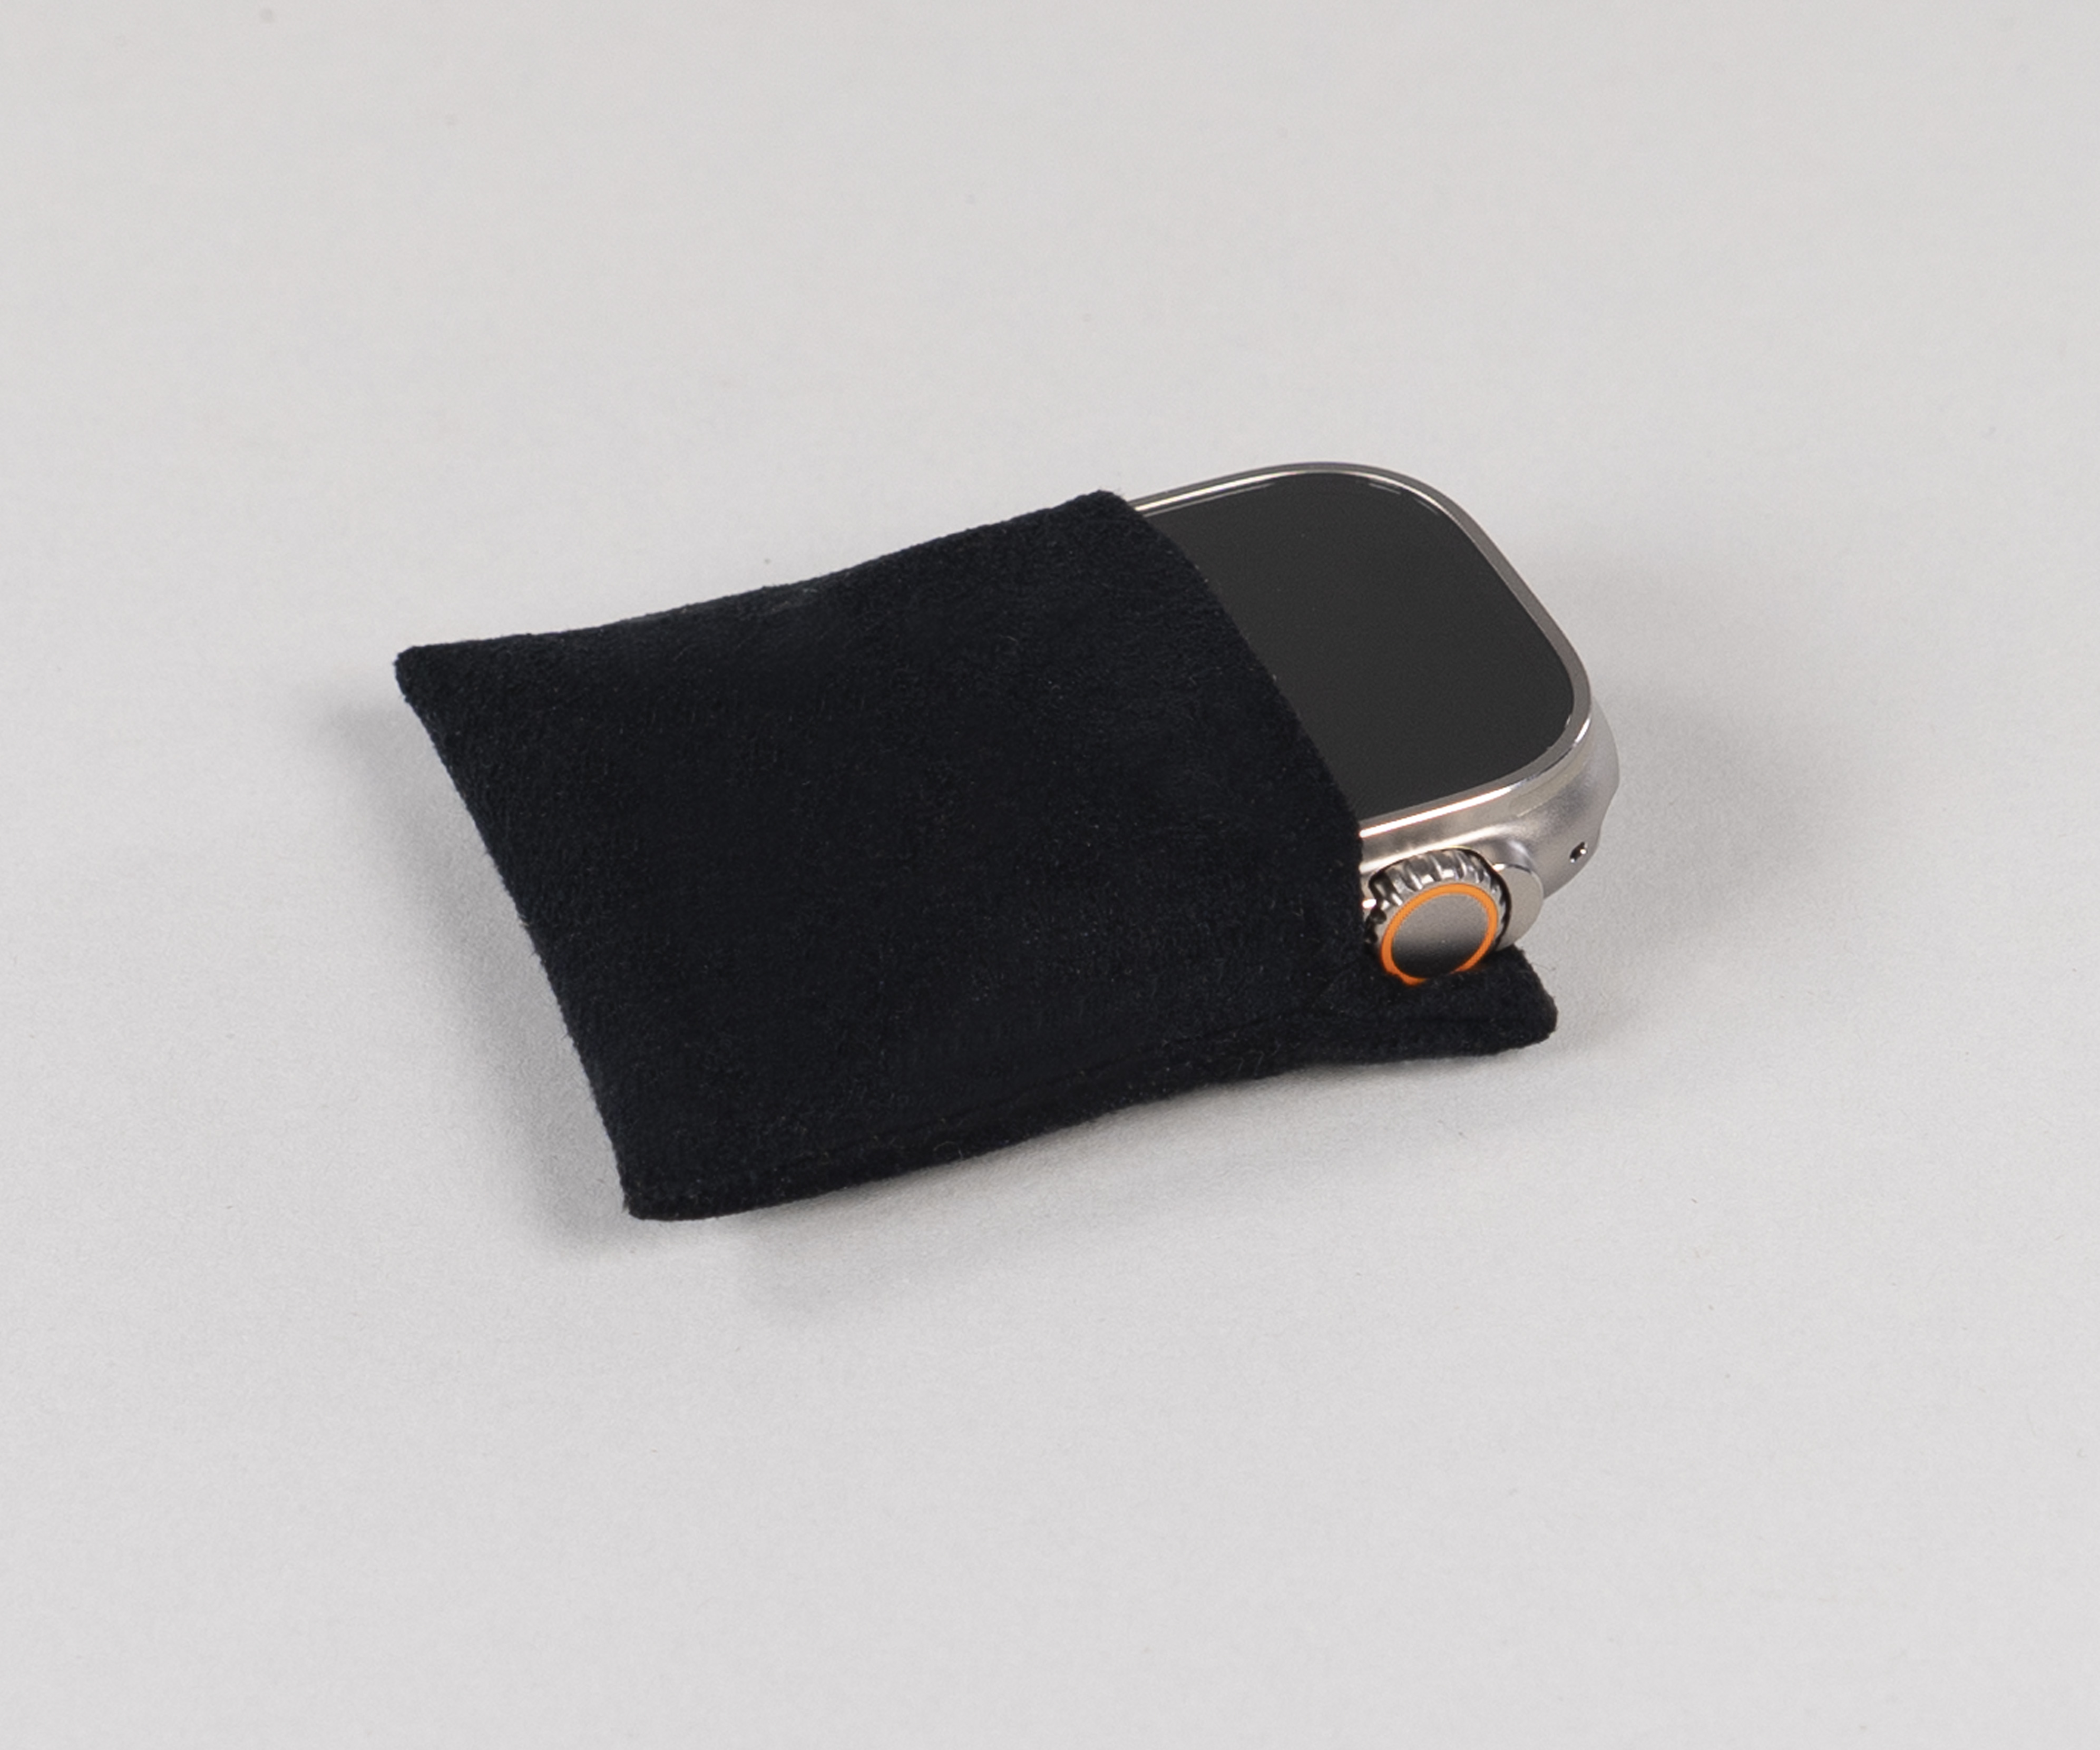 Ultrasuede Pouch for the Apple Watch face